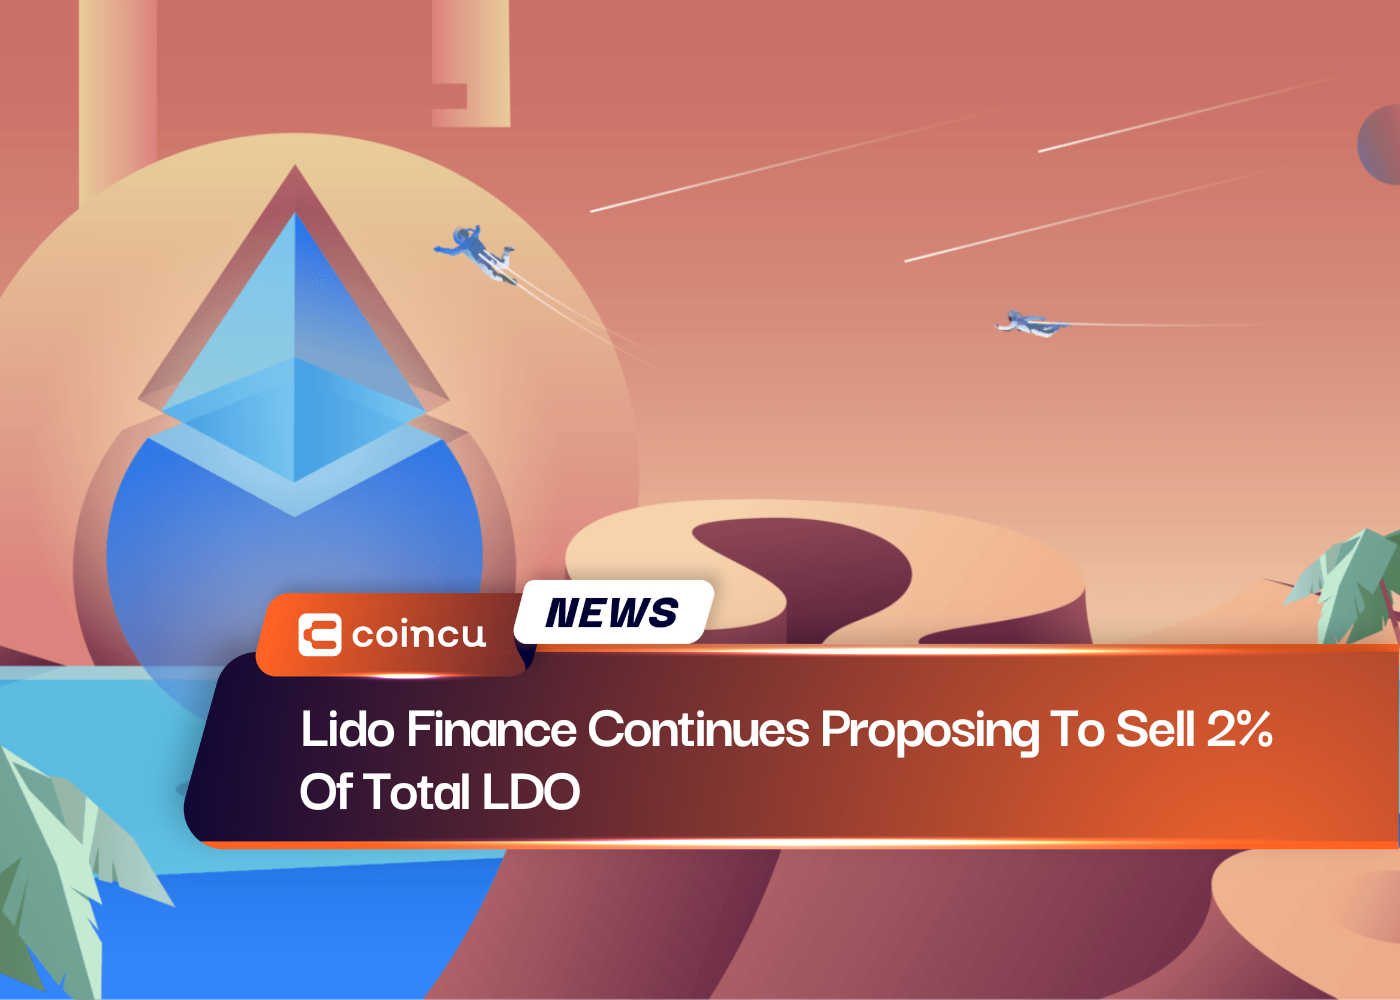 Lido Finance Continues Proposing To Sell 2% Of Total LDO